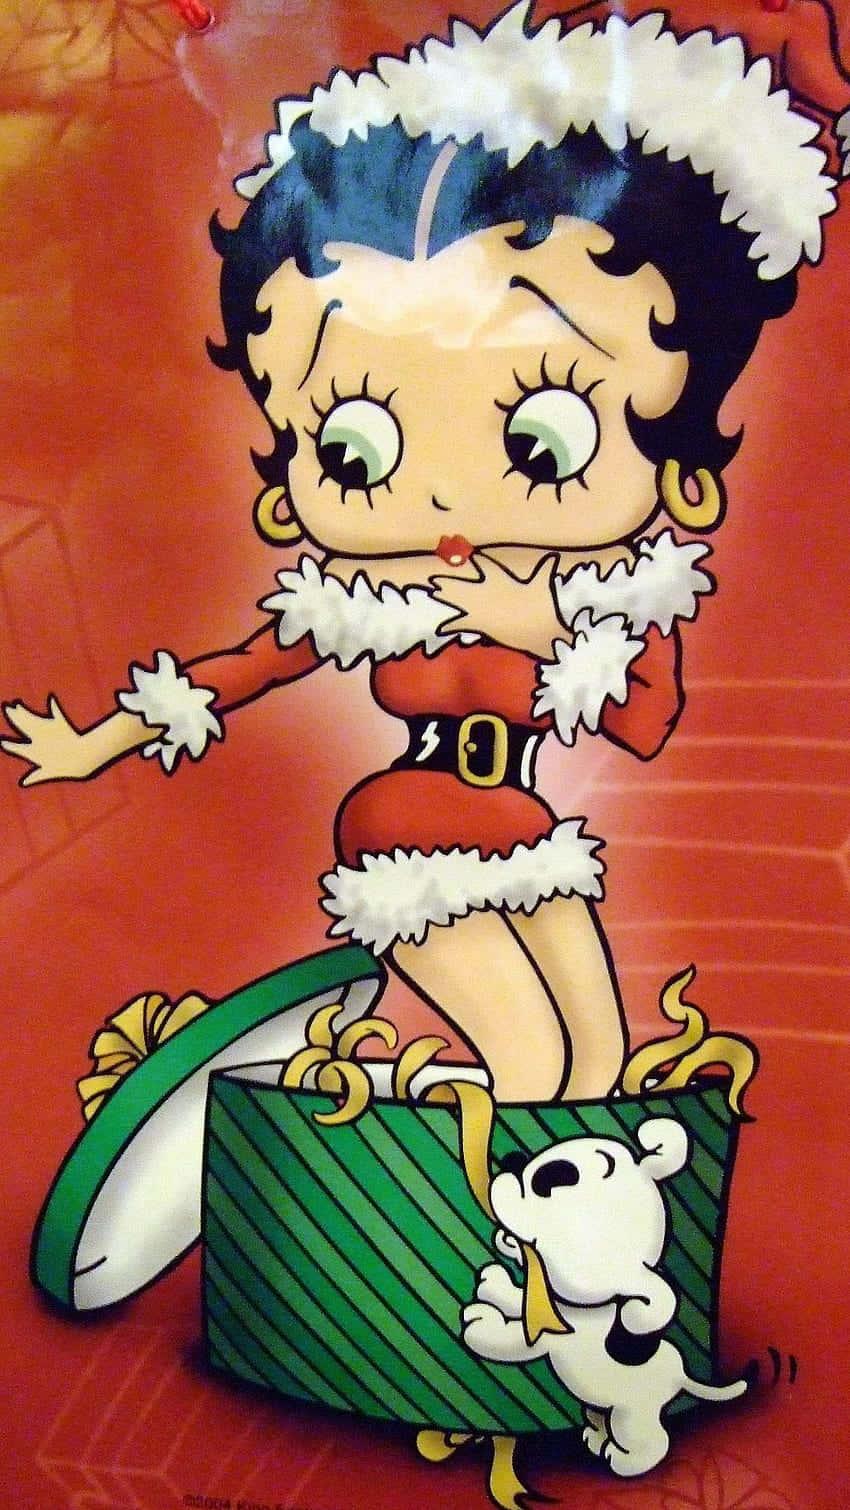 Betty Boop Celebrating Christmas With A Warm Holiday